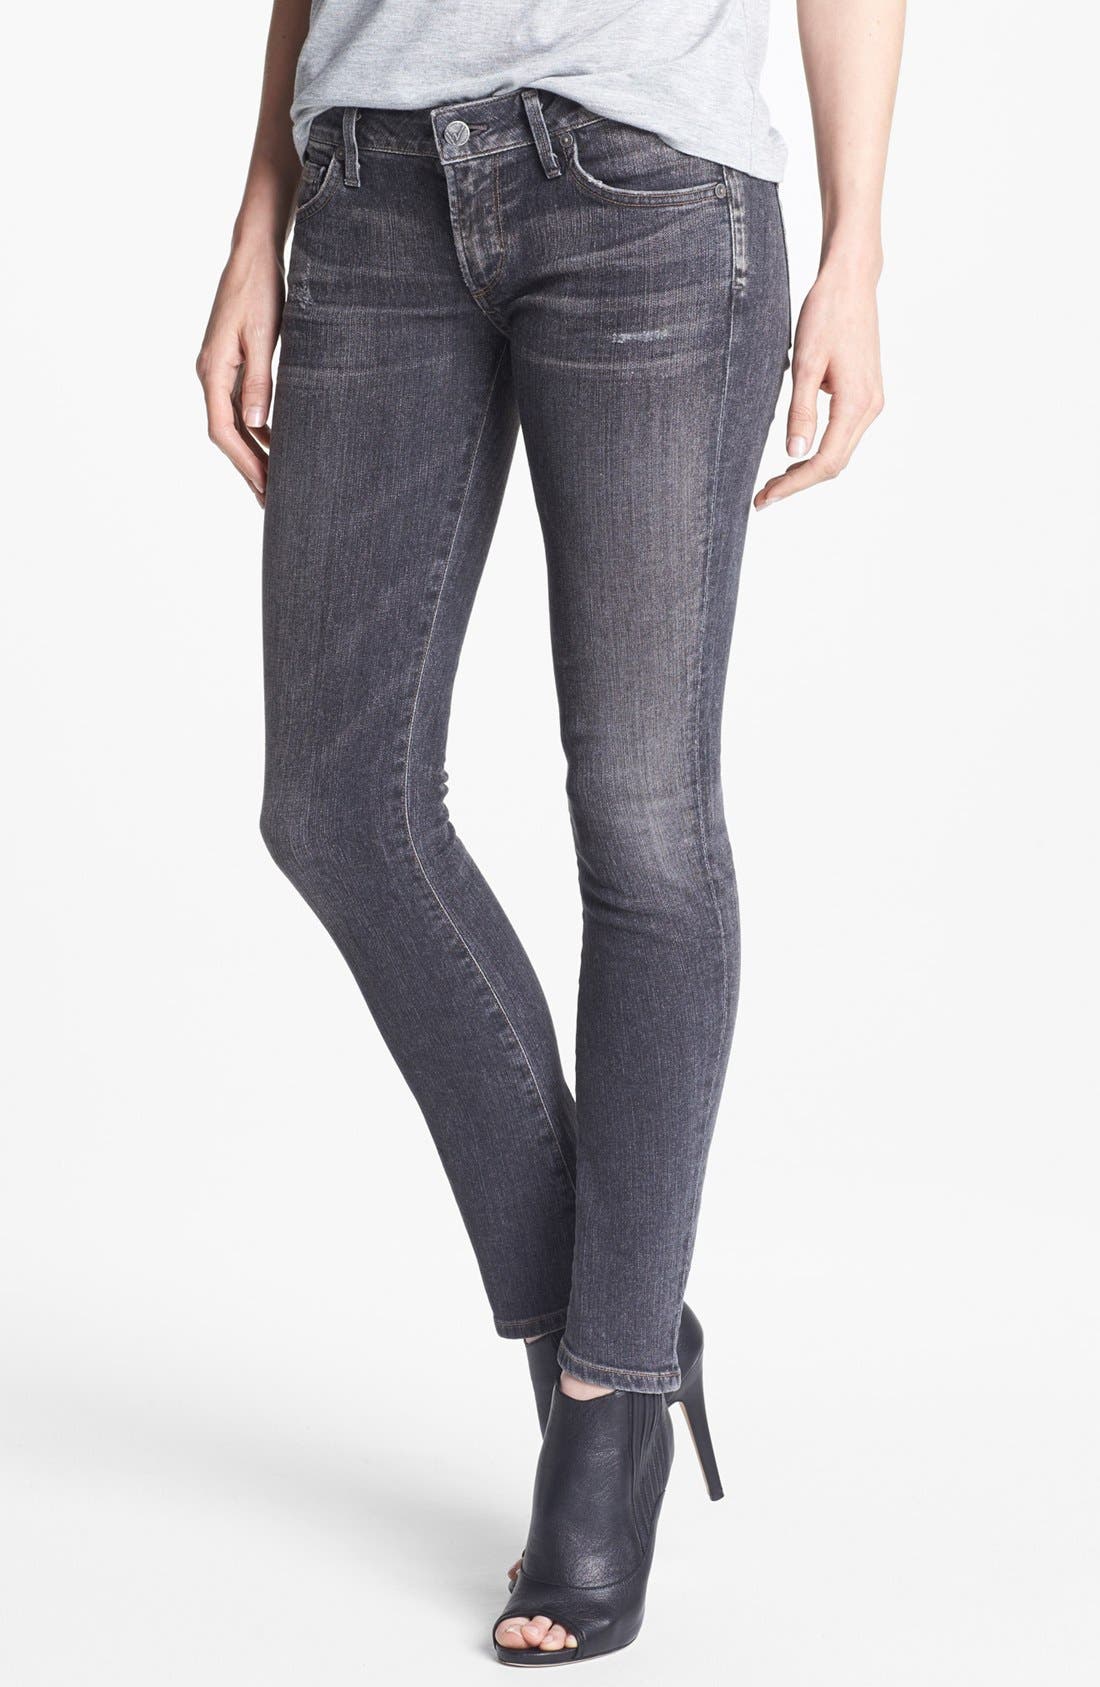 citizens of humanity low rise skinny jeans